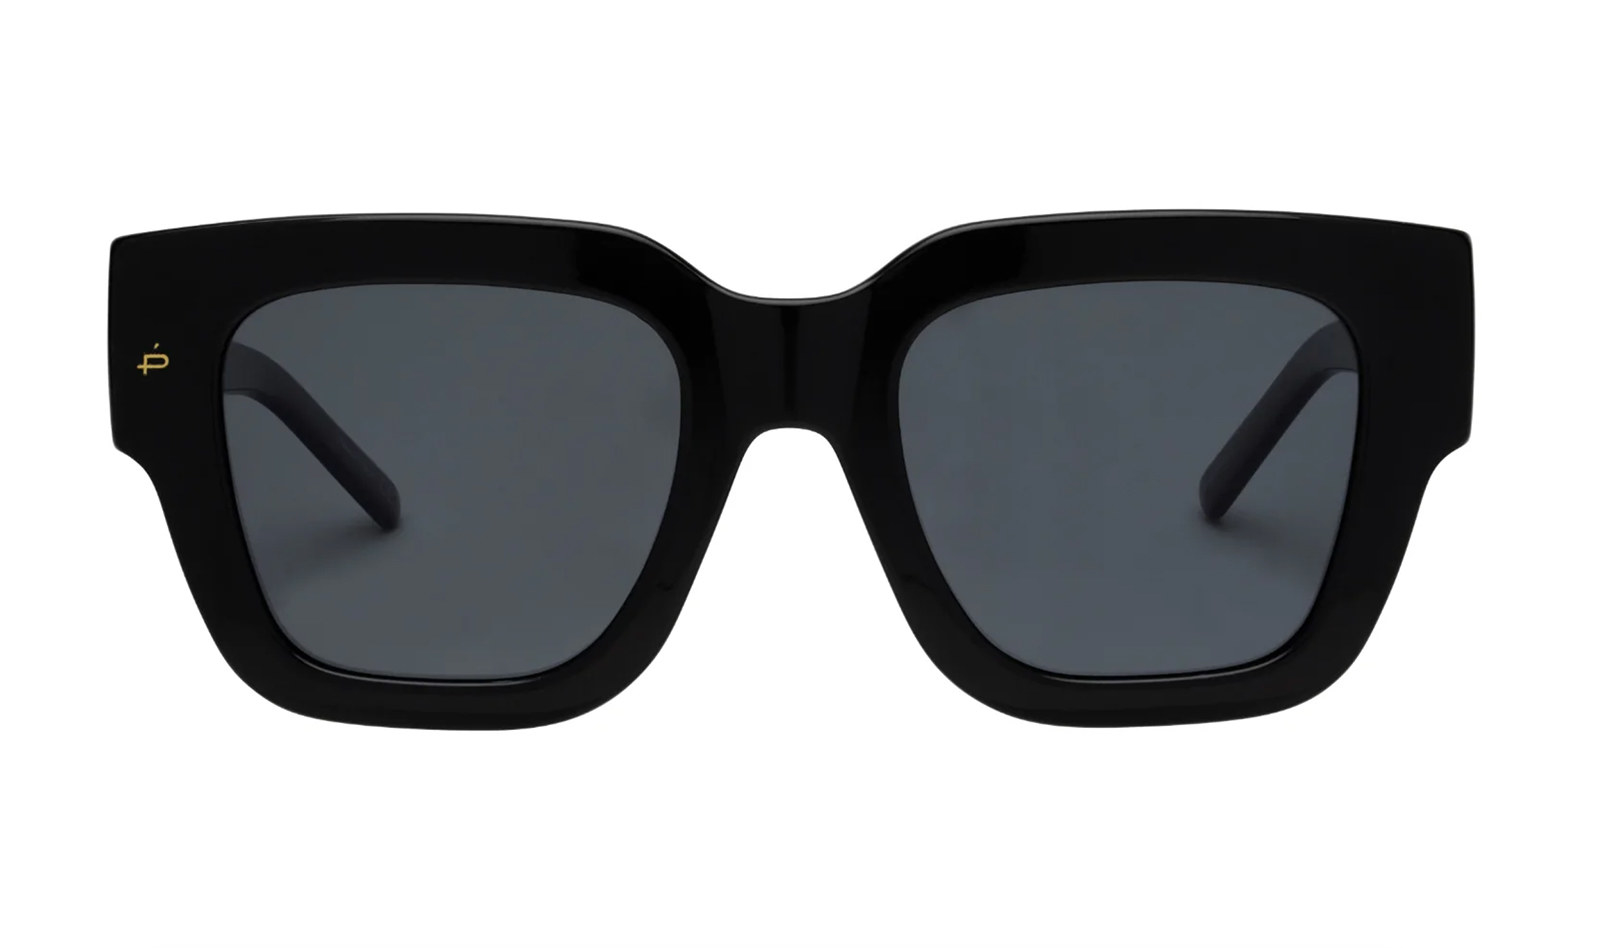 An image of The New Yorker by Privé Revaux sunglasses